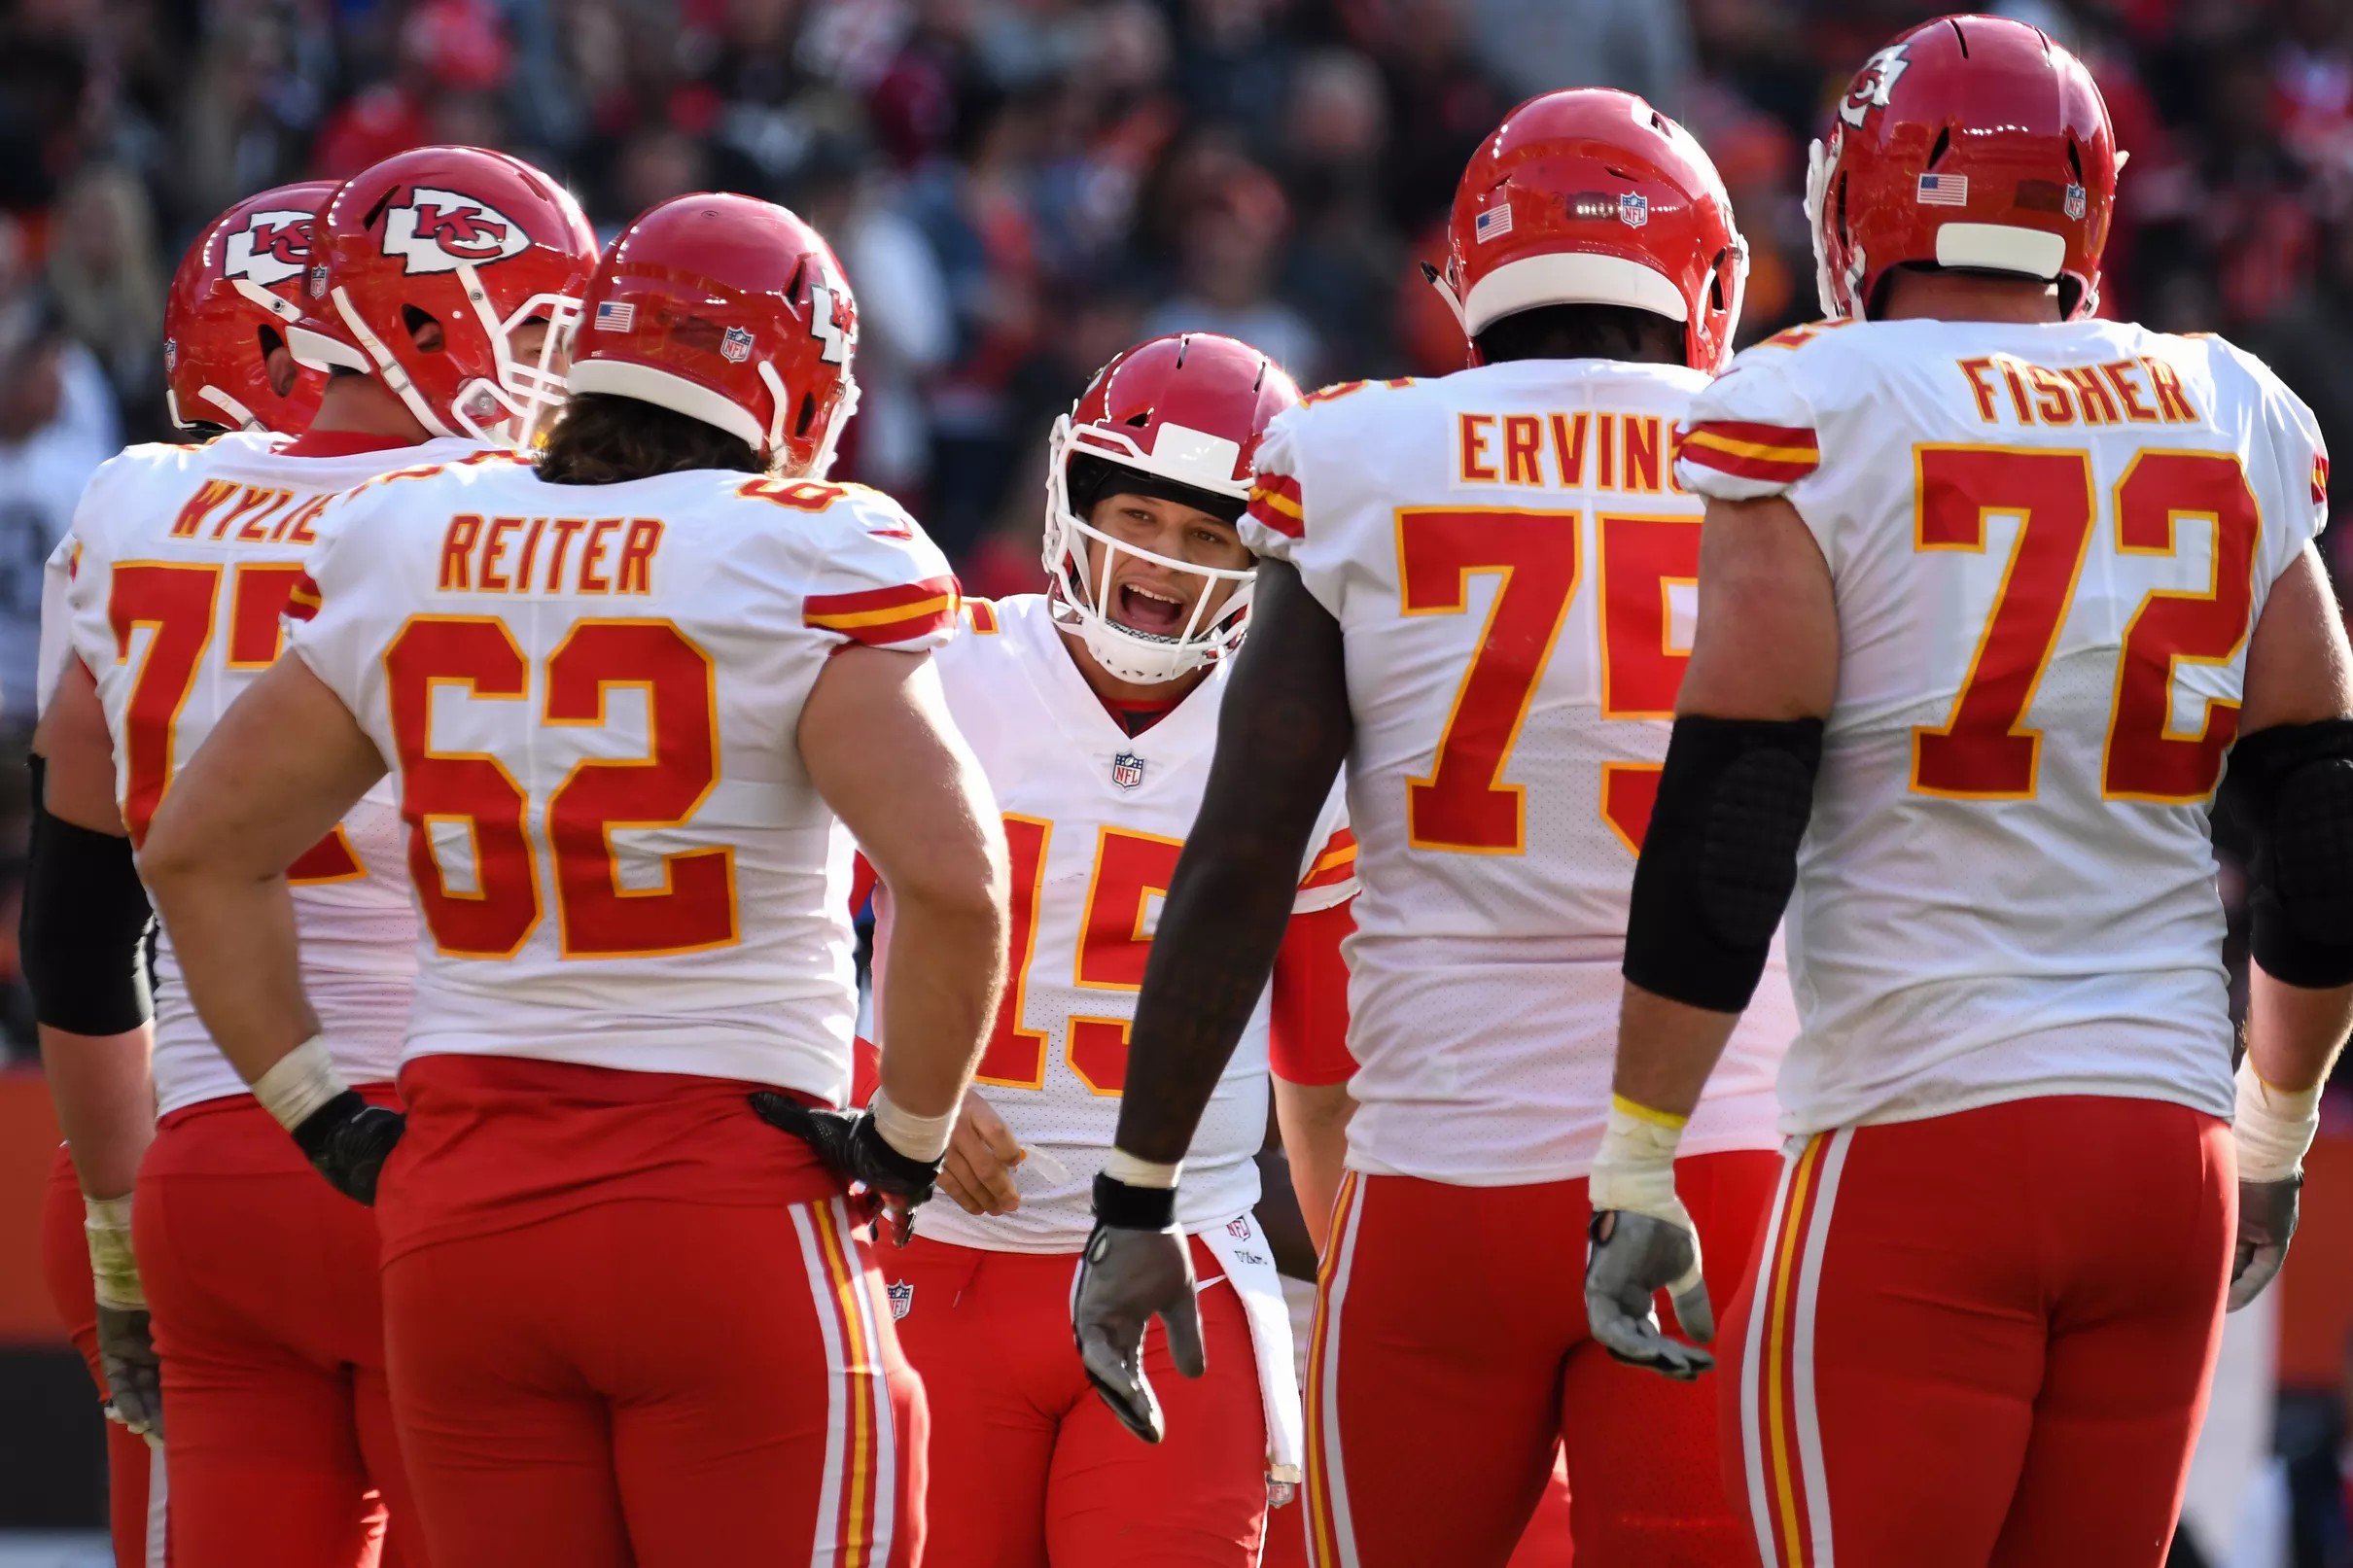 The offensive line will be a key factor in the Chiefs’ Super Bowl